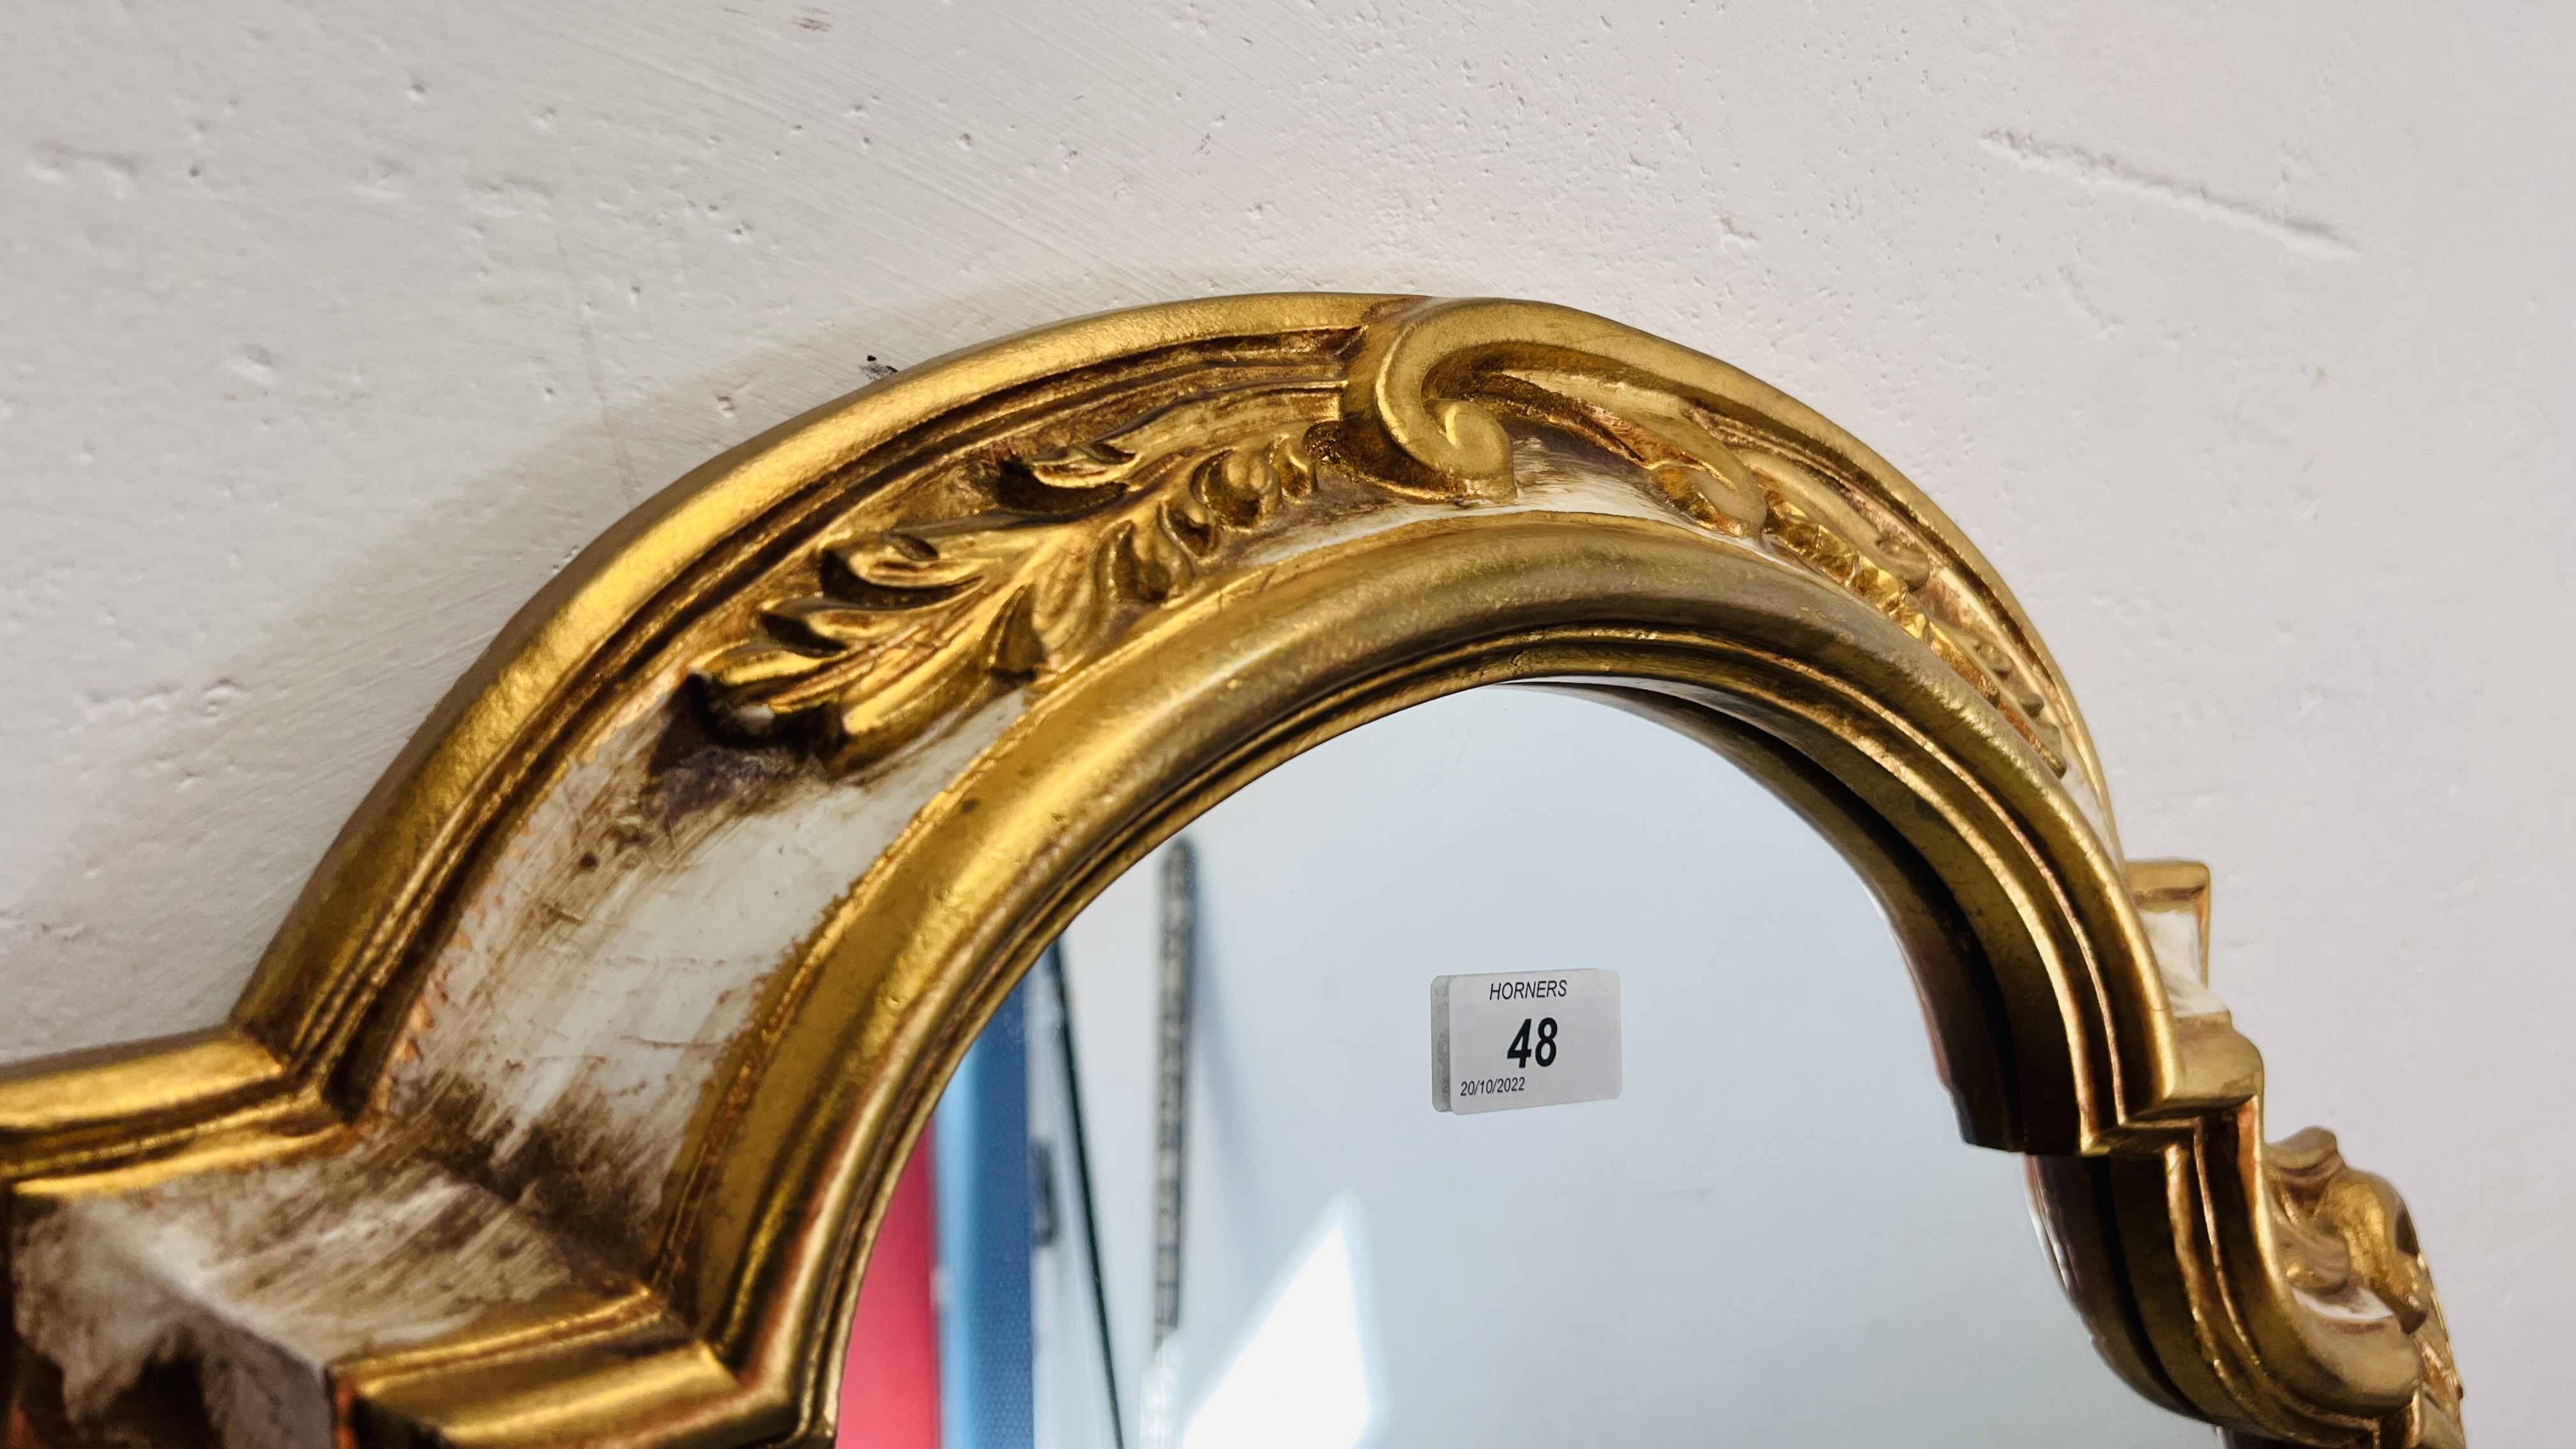 ORNATE SHAPED WALL MIRROR IN GILT DECORATED FRAMEWORK - HEIGHT 100CM. WIDTH 66CM. - Image 2 of 5